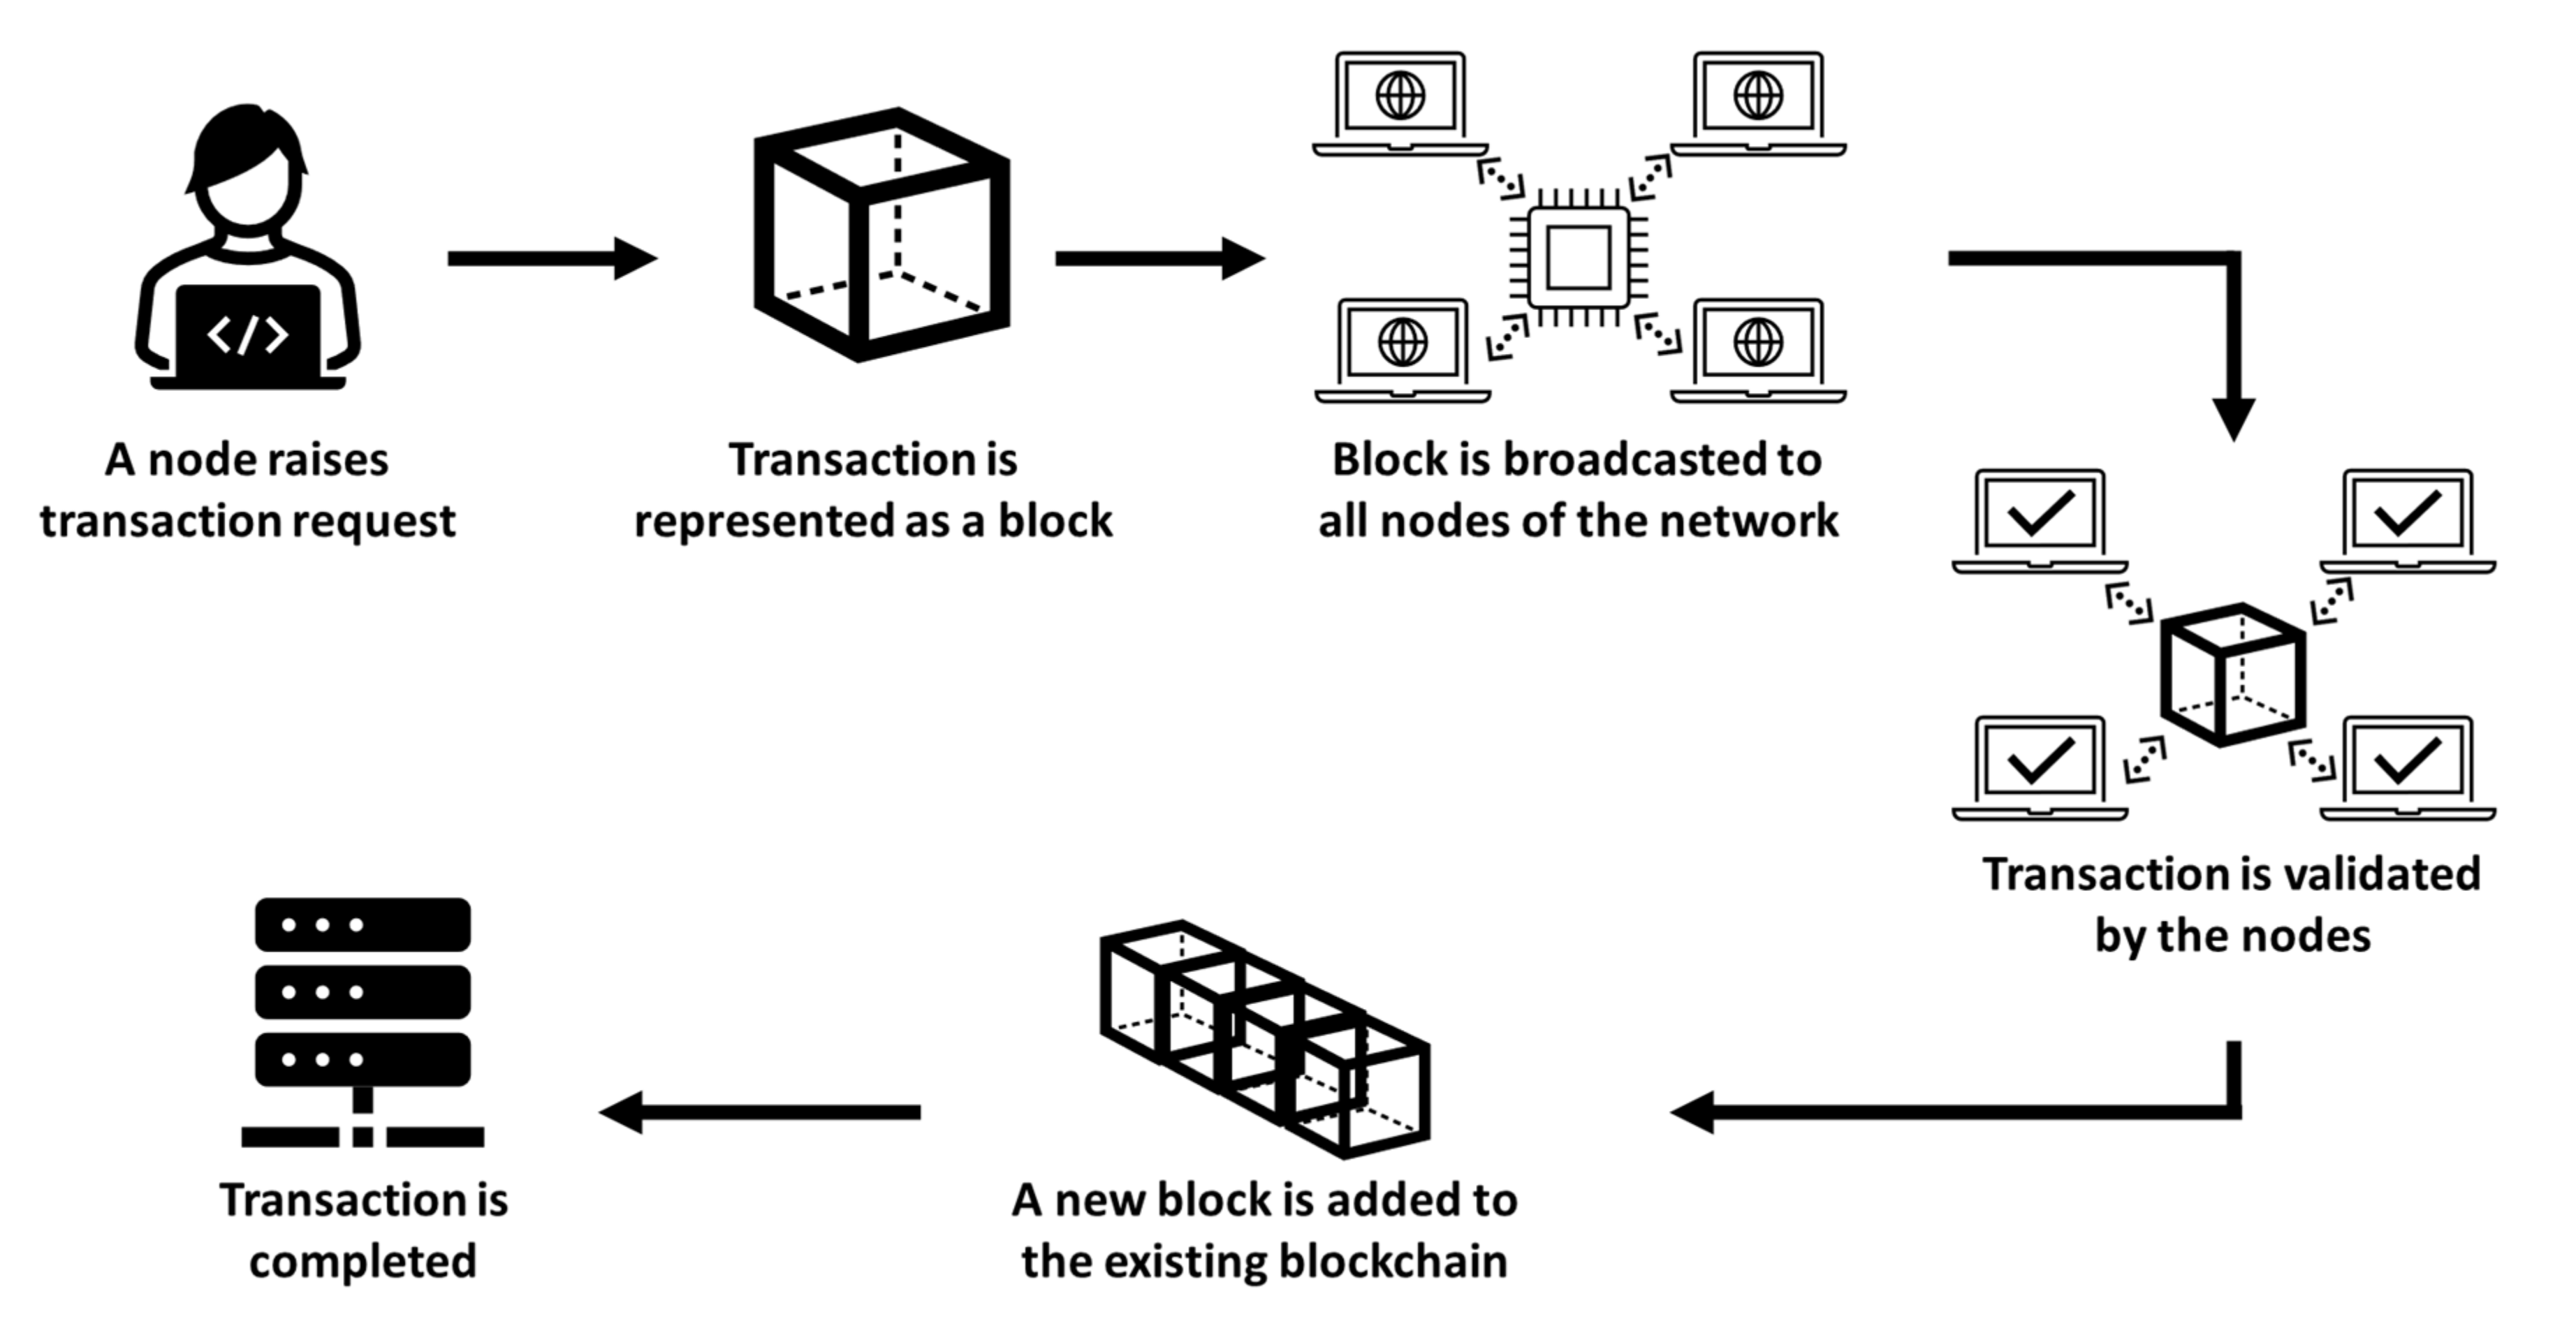 Code snippet of putting transaction in block